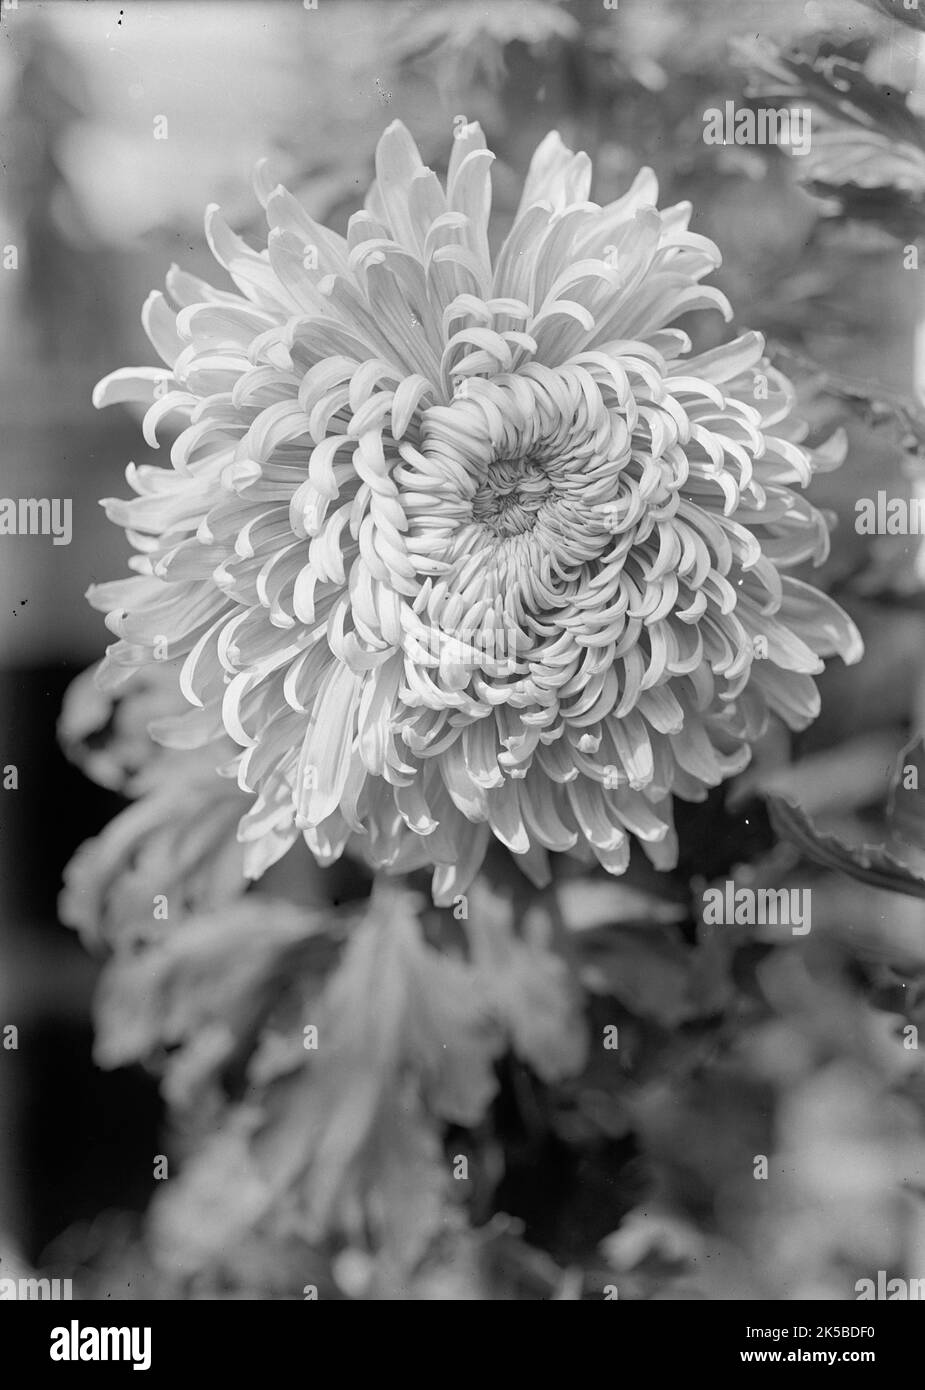 Agriculture Department - 'Jessie Wilson' Chrysanthemum, 1913. Flower possibly named after Jessie Woodrow Wilson Sayre, daughter of US President Woodrow Wilson. Stock Photo